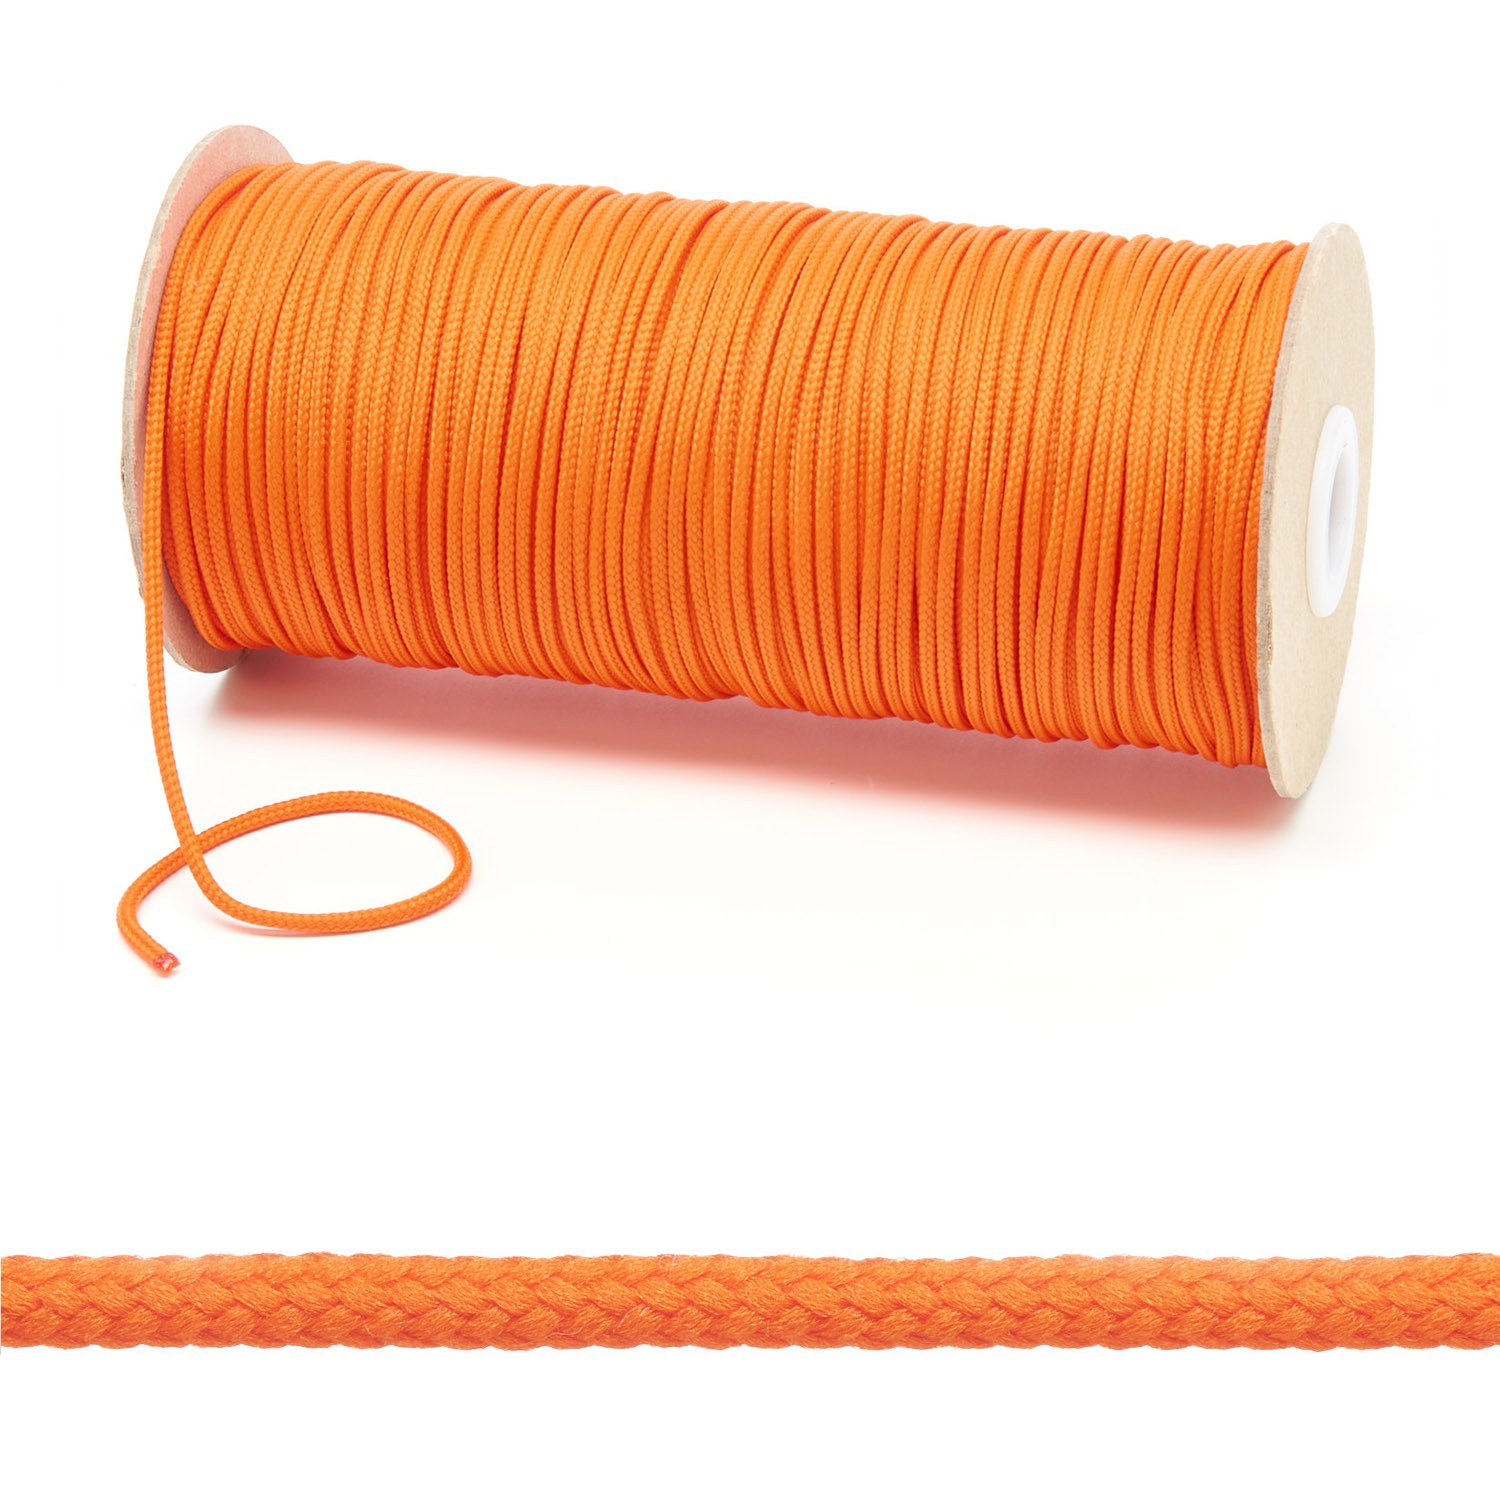 2mm Thin Round Orange Polyester Cord - by Kalsi Cords UK Made Quality